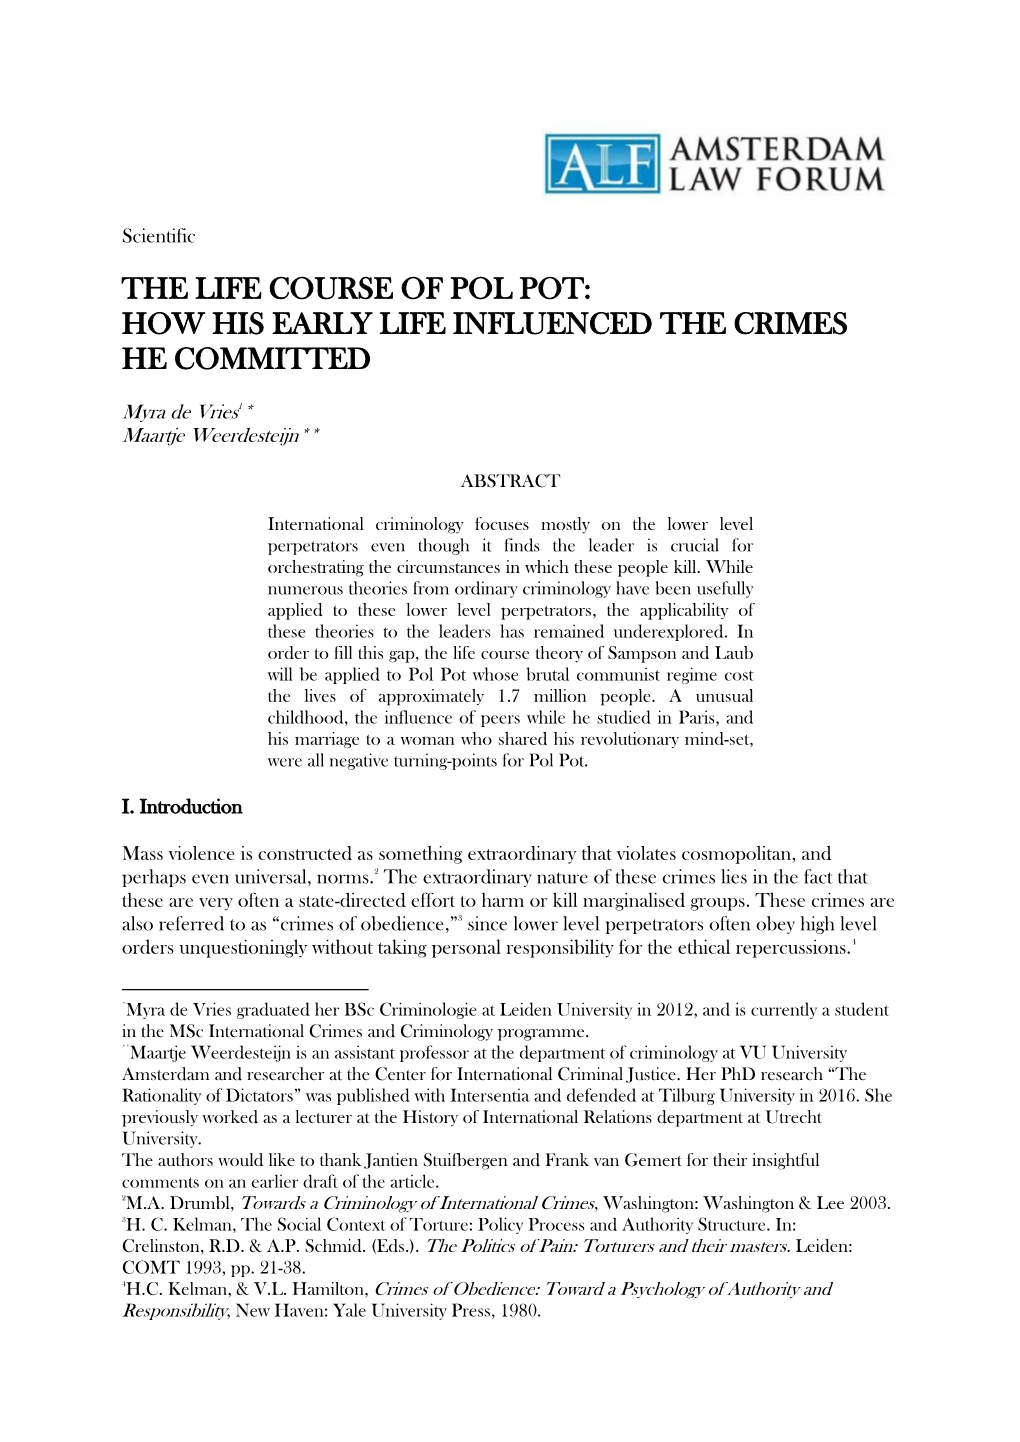 The Life Course of Pol Pot: How His Early Life Influenced the Crimes He Committed